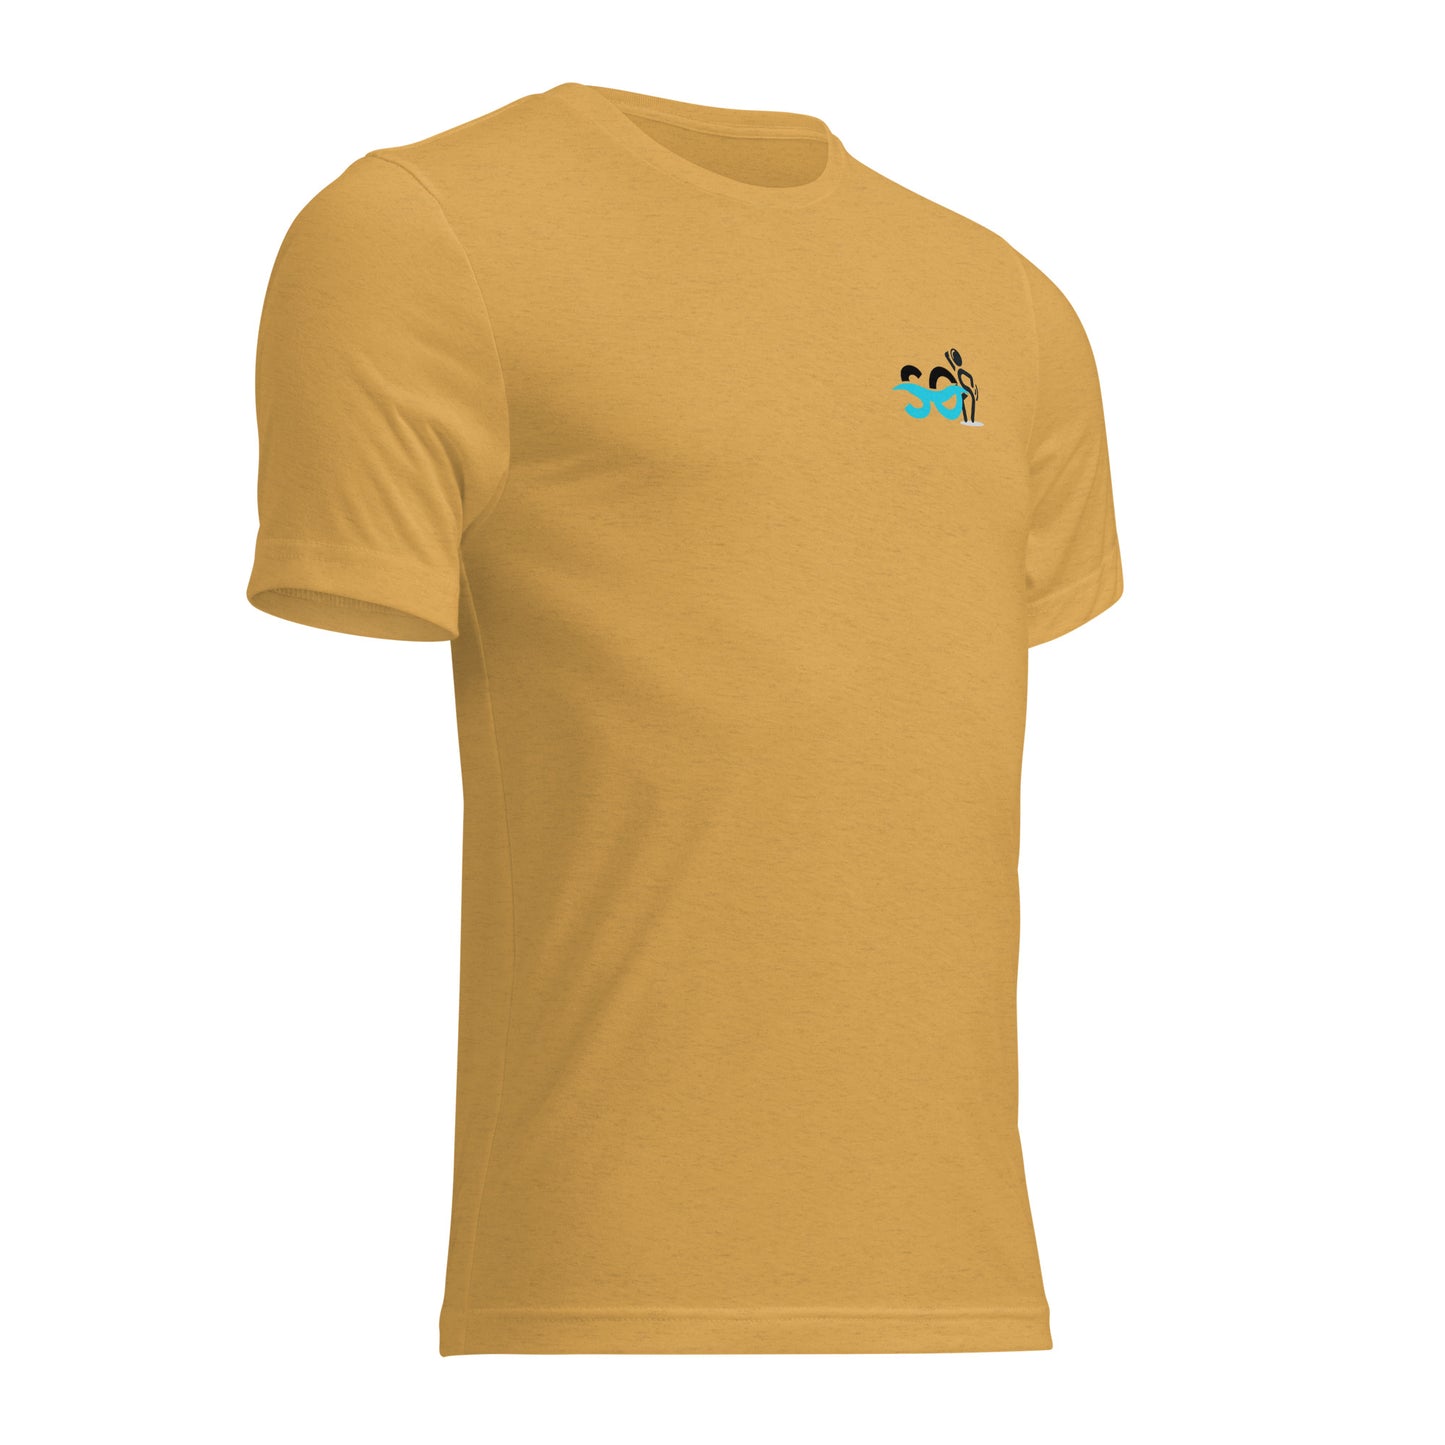 a yellow t - shirt with a picture of a beach scene